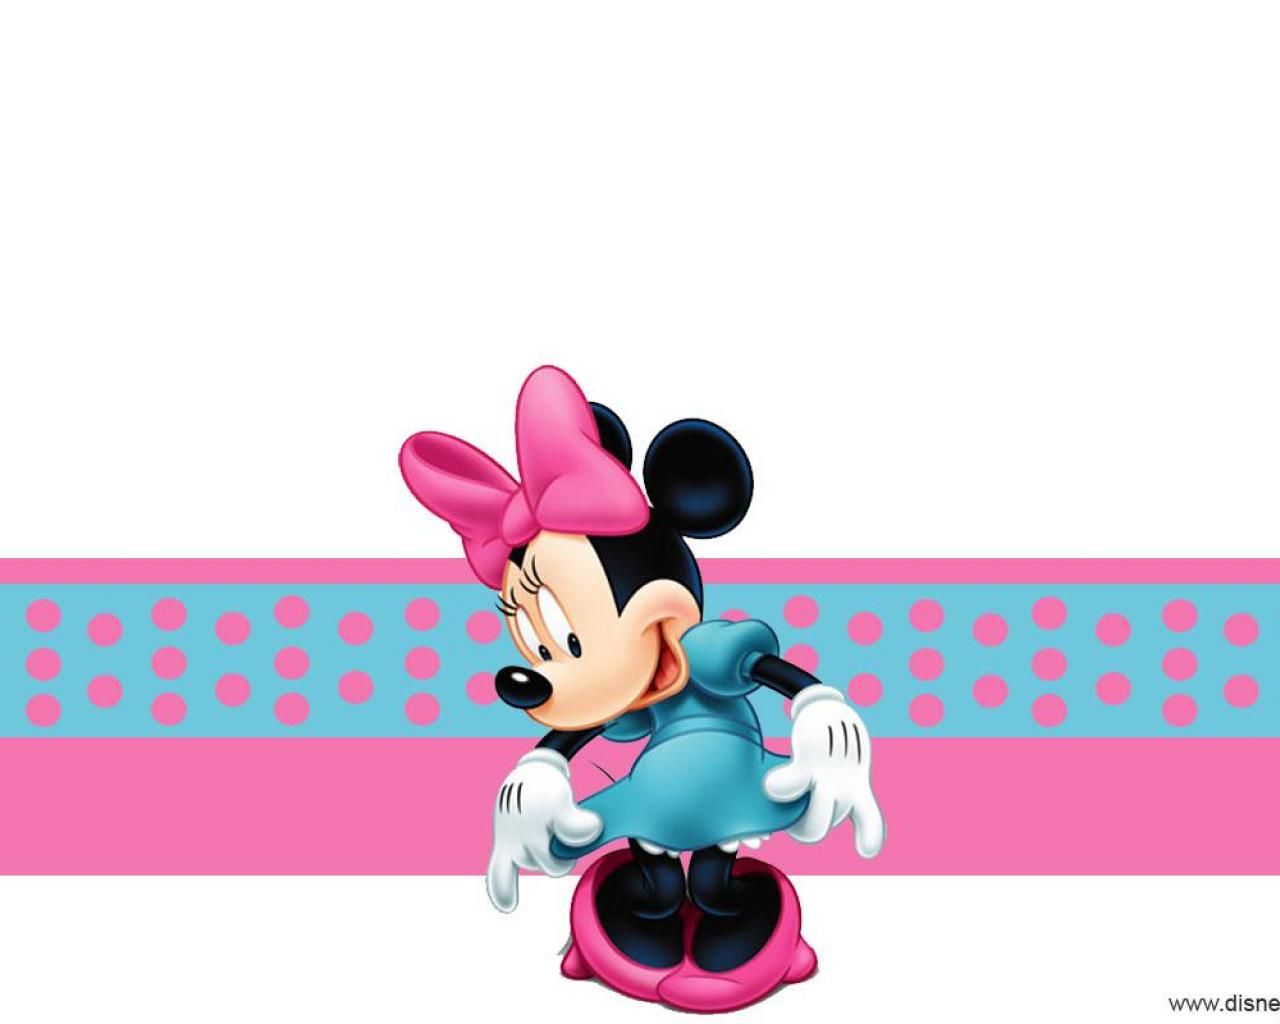 Minnie mouse - - High Quality and Resolution Wallpapers